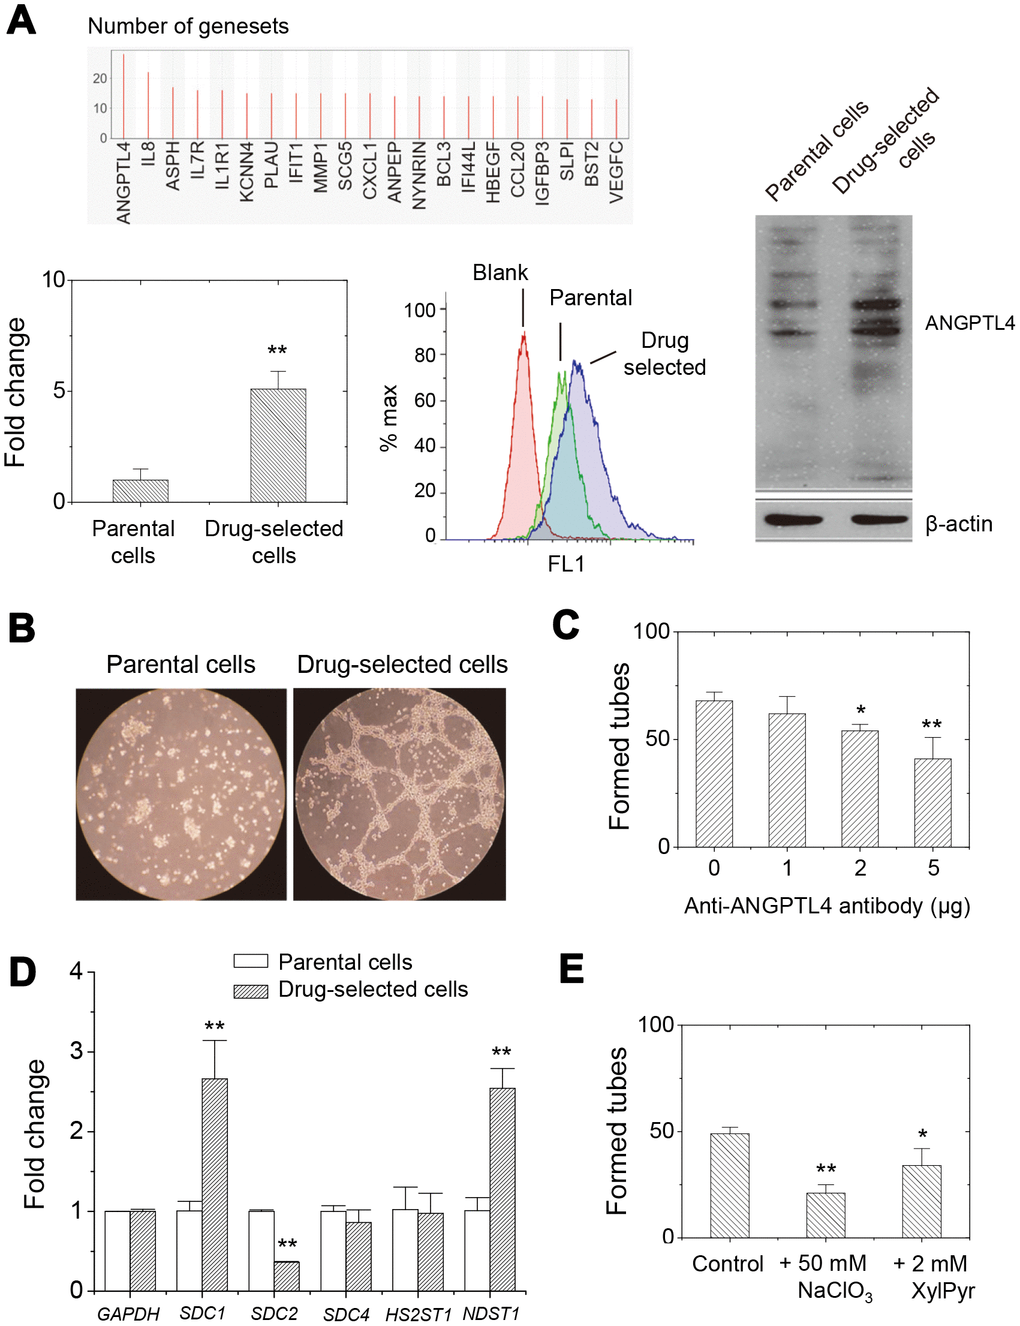 Higher expression of ANGPTL4 in drug-selected cells contributed to angiogenic activity through glycosaminoglycan modification on proteoglycans. (A) GSEA analysis showed that ANGPTL4 was the enriched in the gene sets related to oncogenic features. qPCR and western blot analysis demonstrated the higher expression level of ANGPTL4 in drug-selected cells. (B) Tube formation assay showed significantly connected and aligned cells by drug-selected cells, but not seen by parental cells. (C) Pretreatment with anti-ANGPTL4 antibody reduced tube-forming activity of drug-selected cells. (n=4; data were mean ±SD; **, p p D) qPCR analysis at expression of several heparan-sulfate proteoglycans (SDC1, SDC2, and SDC4) and sulfate transferases (HS2ST1 and NDST1) in parental and drug-selected cells. (E) Pretreatment with chemical inhibitors to reduce sulfate groups (by NaClO3, sodium chlorate) or carbohydrate chain biosynthesis (by XylPyr, xylopyroside) inhibited tube-forming activity of drug-selected cells. (n=4; data were mean ±SD; **, p p 